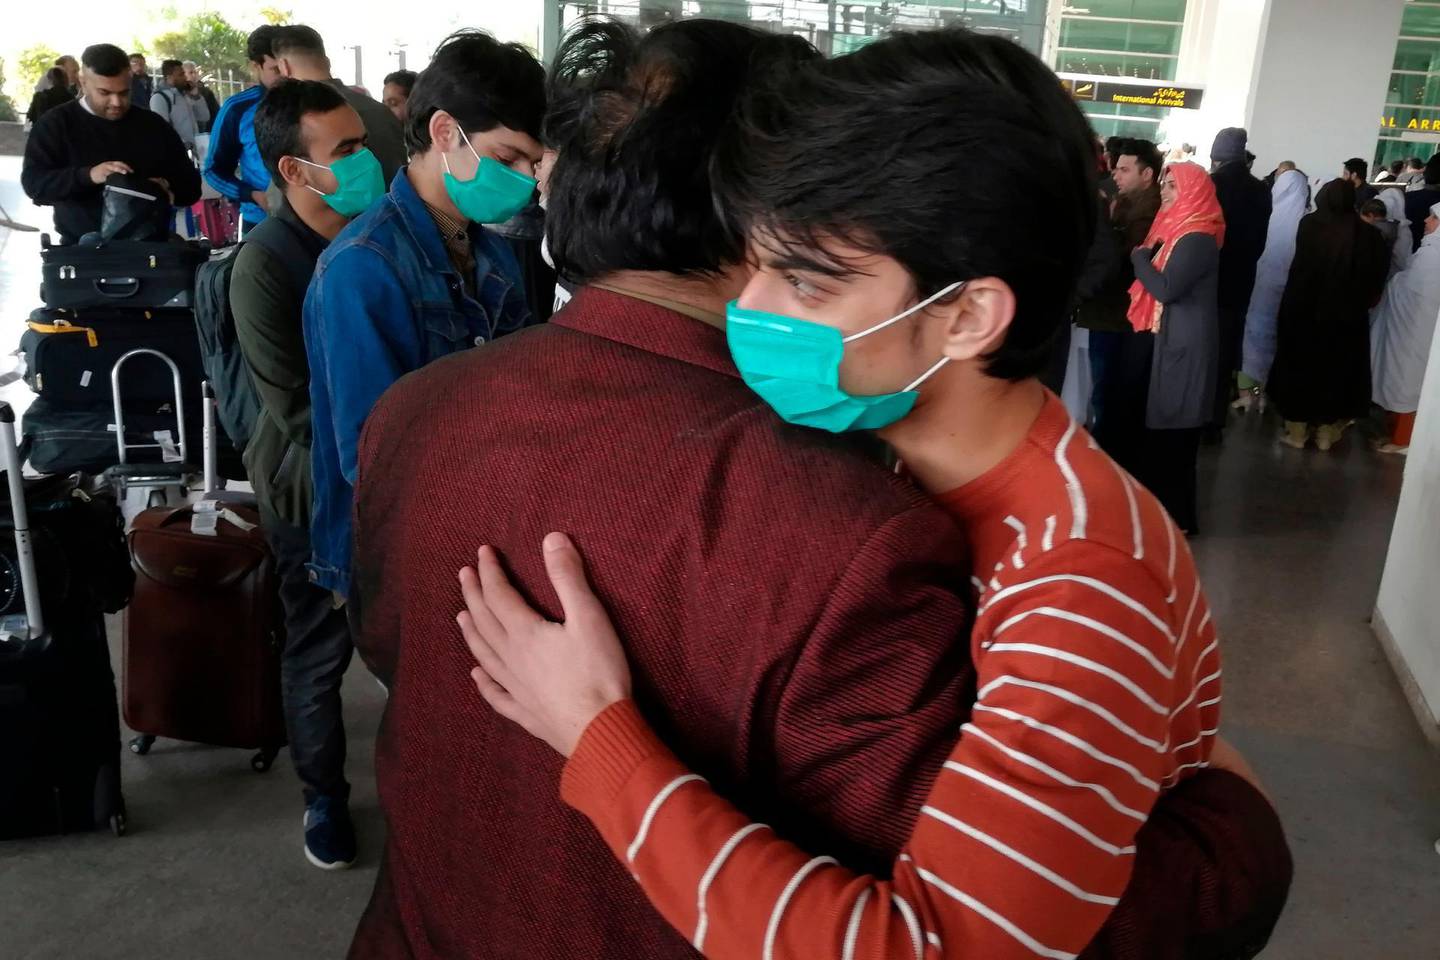 A Pakistani student wearing protective facemask hugs with a relative upon his arrival with other students from China at the Islamabad International Airport in Islamabad on February 3, 2020. Pakistan on February 3 resumed flight operations with China, days after it had suspended all direct flights with China as the death toll from the coronavirus epidemic soared past 360. The China Southern Airlines' flight from China brought 69 passengers including 57 Pakistanis and 12 Chinese to Islamabad International Airport, according to Zafar Mirza, special assistant to Prime Minister Imran Khan on heath. / AFP / Aamir QURESHI
